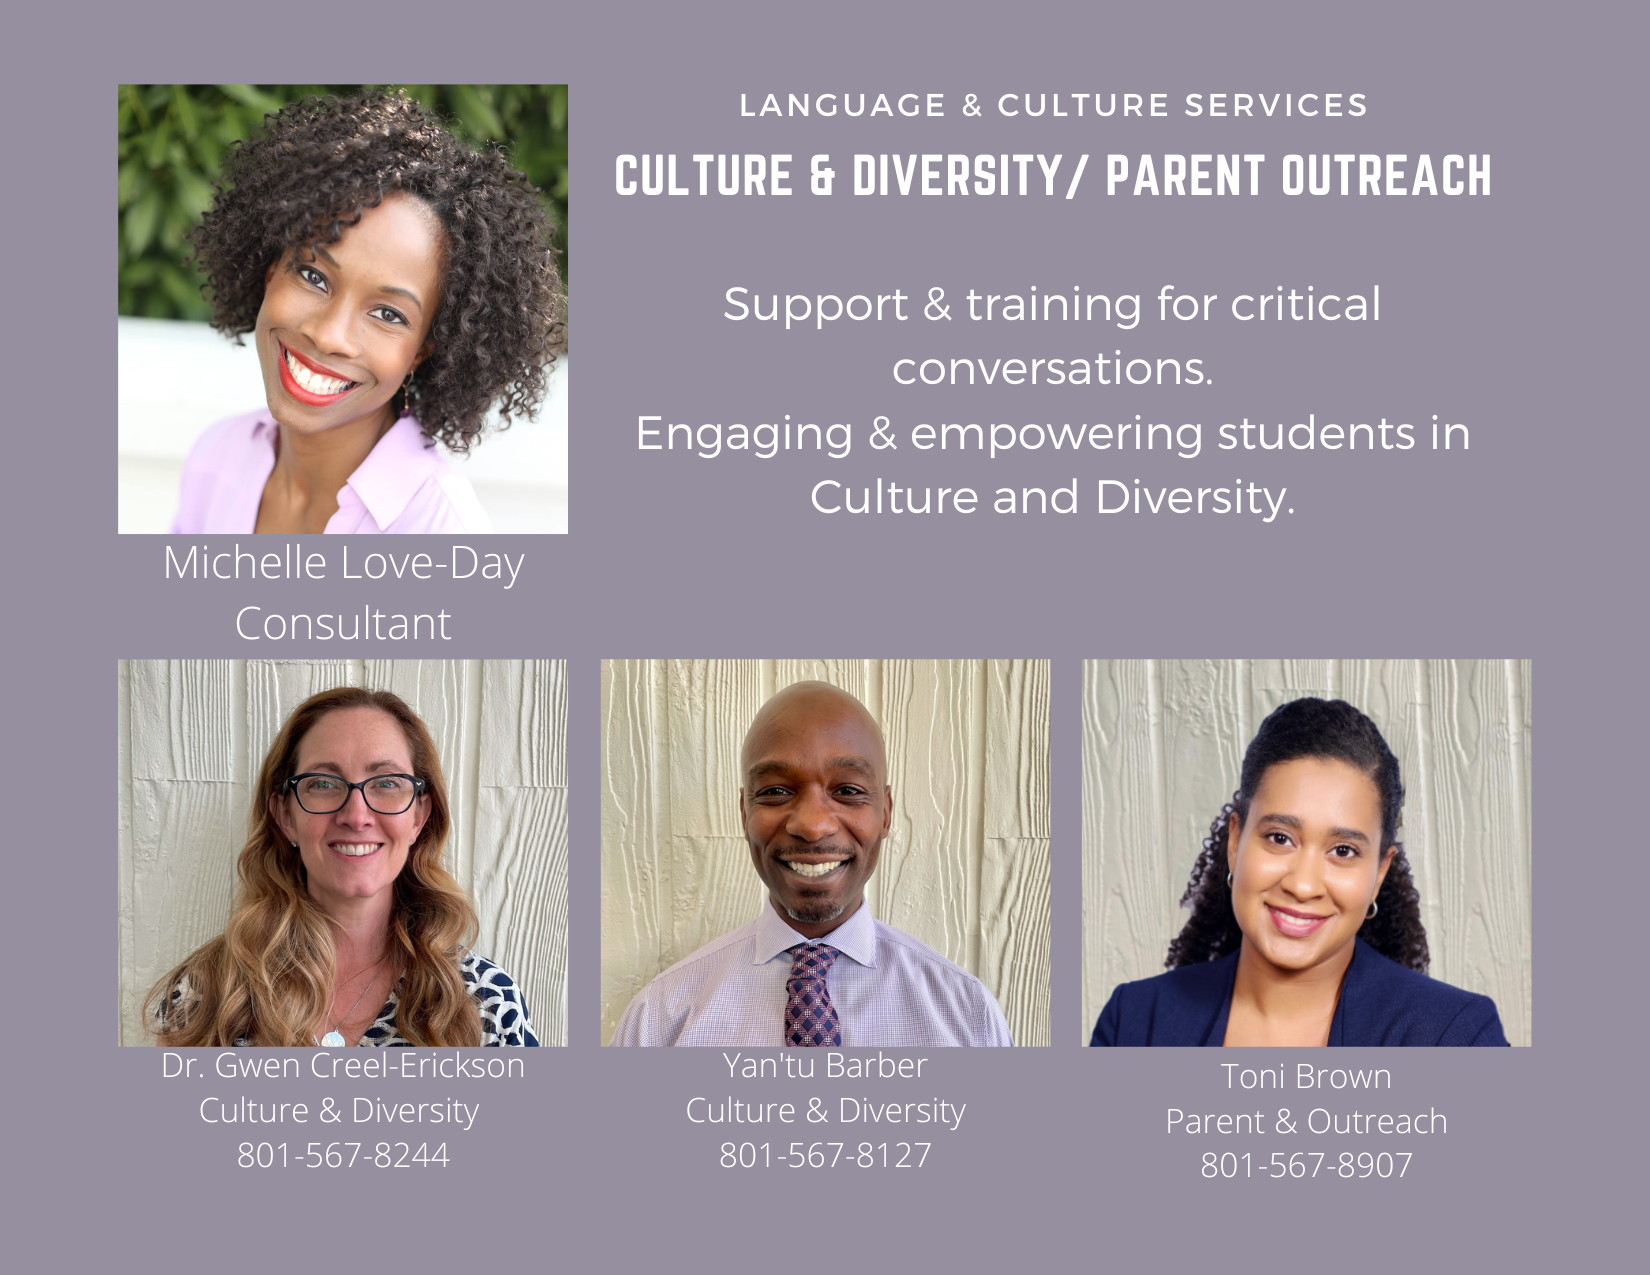 Culture and diversity specialist for Jordan district. Michelle Loveday, director; Gwen Creel-Erickson, culture and diversity specialist; Yan'tu Barber, culture and diversity specialist; and Toni Brown, parent outreach specialist